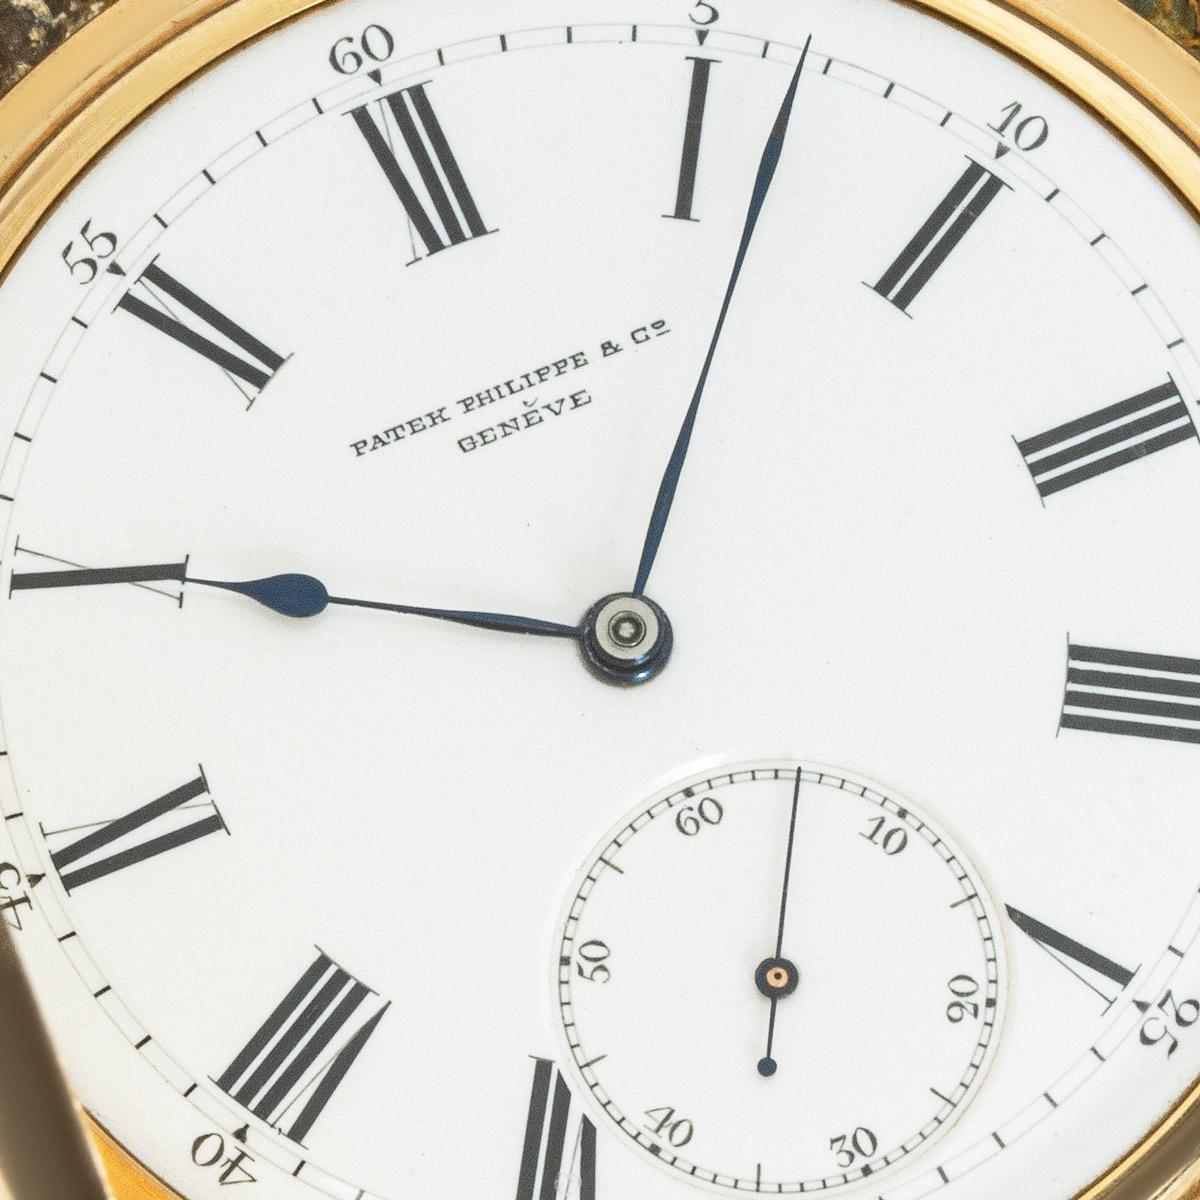 Patek Philippe 18kt Rose Gold Keyless Lever Full Hunter Pocket Watch C1900s.

Dial: The white enamel dial fully signed Patek Philippe & Co Geneve with Roman numerals outer minute track and subsidiary seconds dial at six o'clock. The original blued